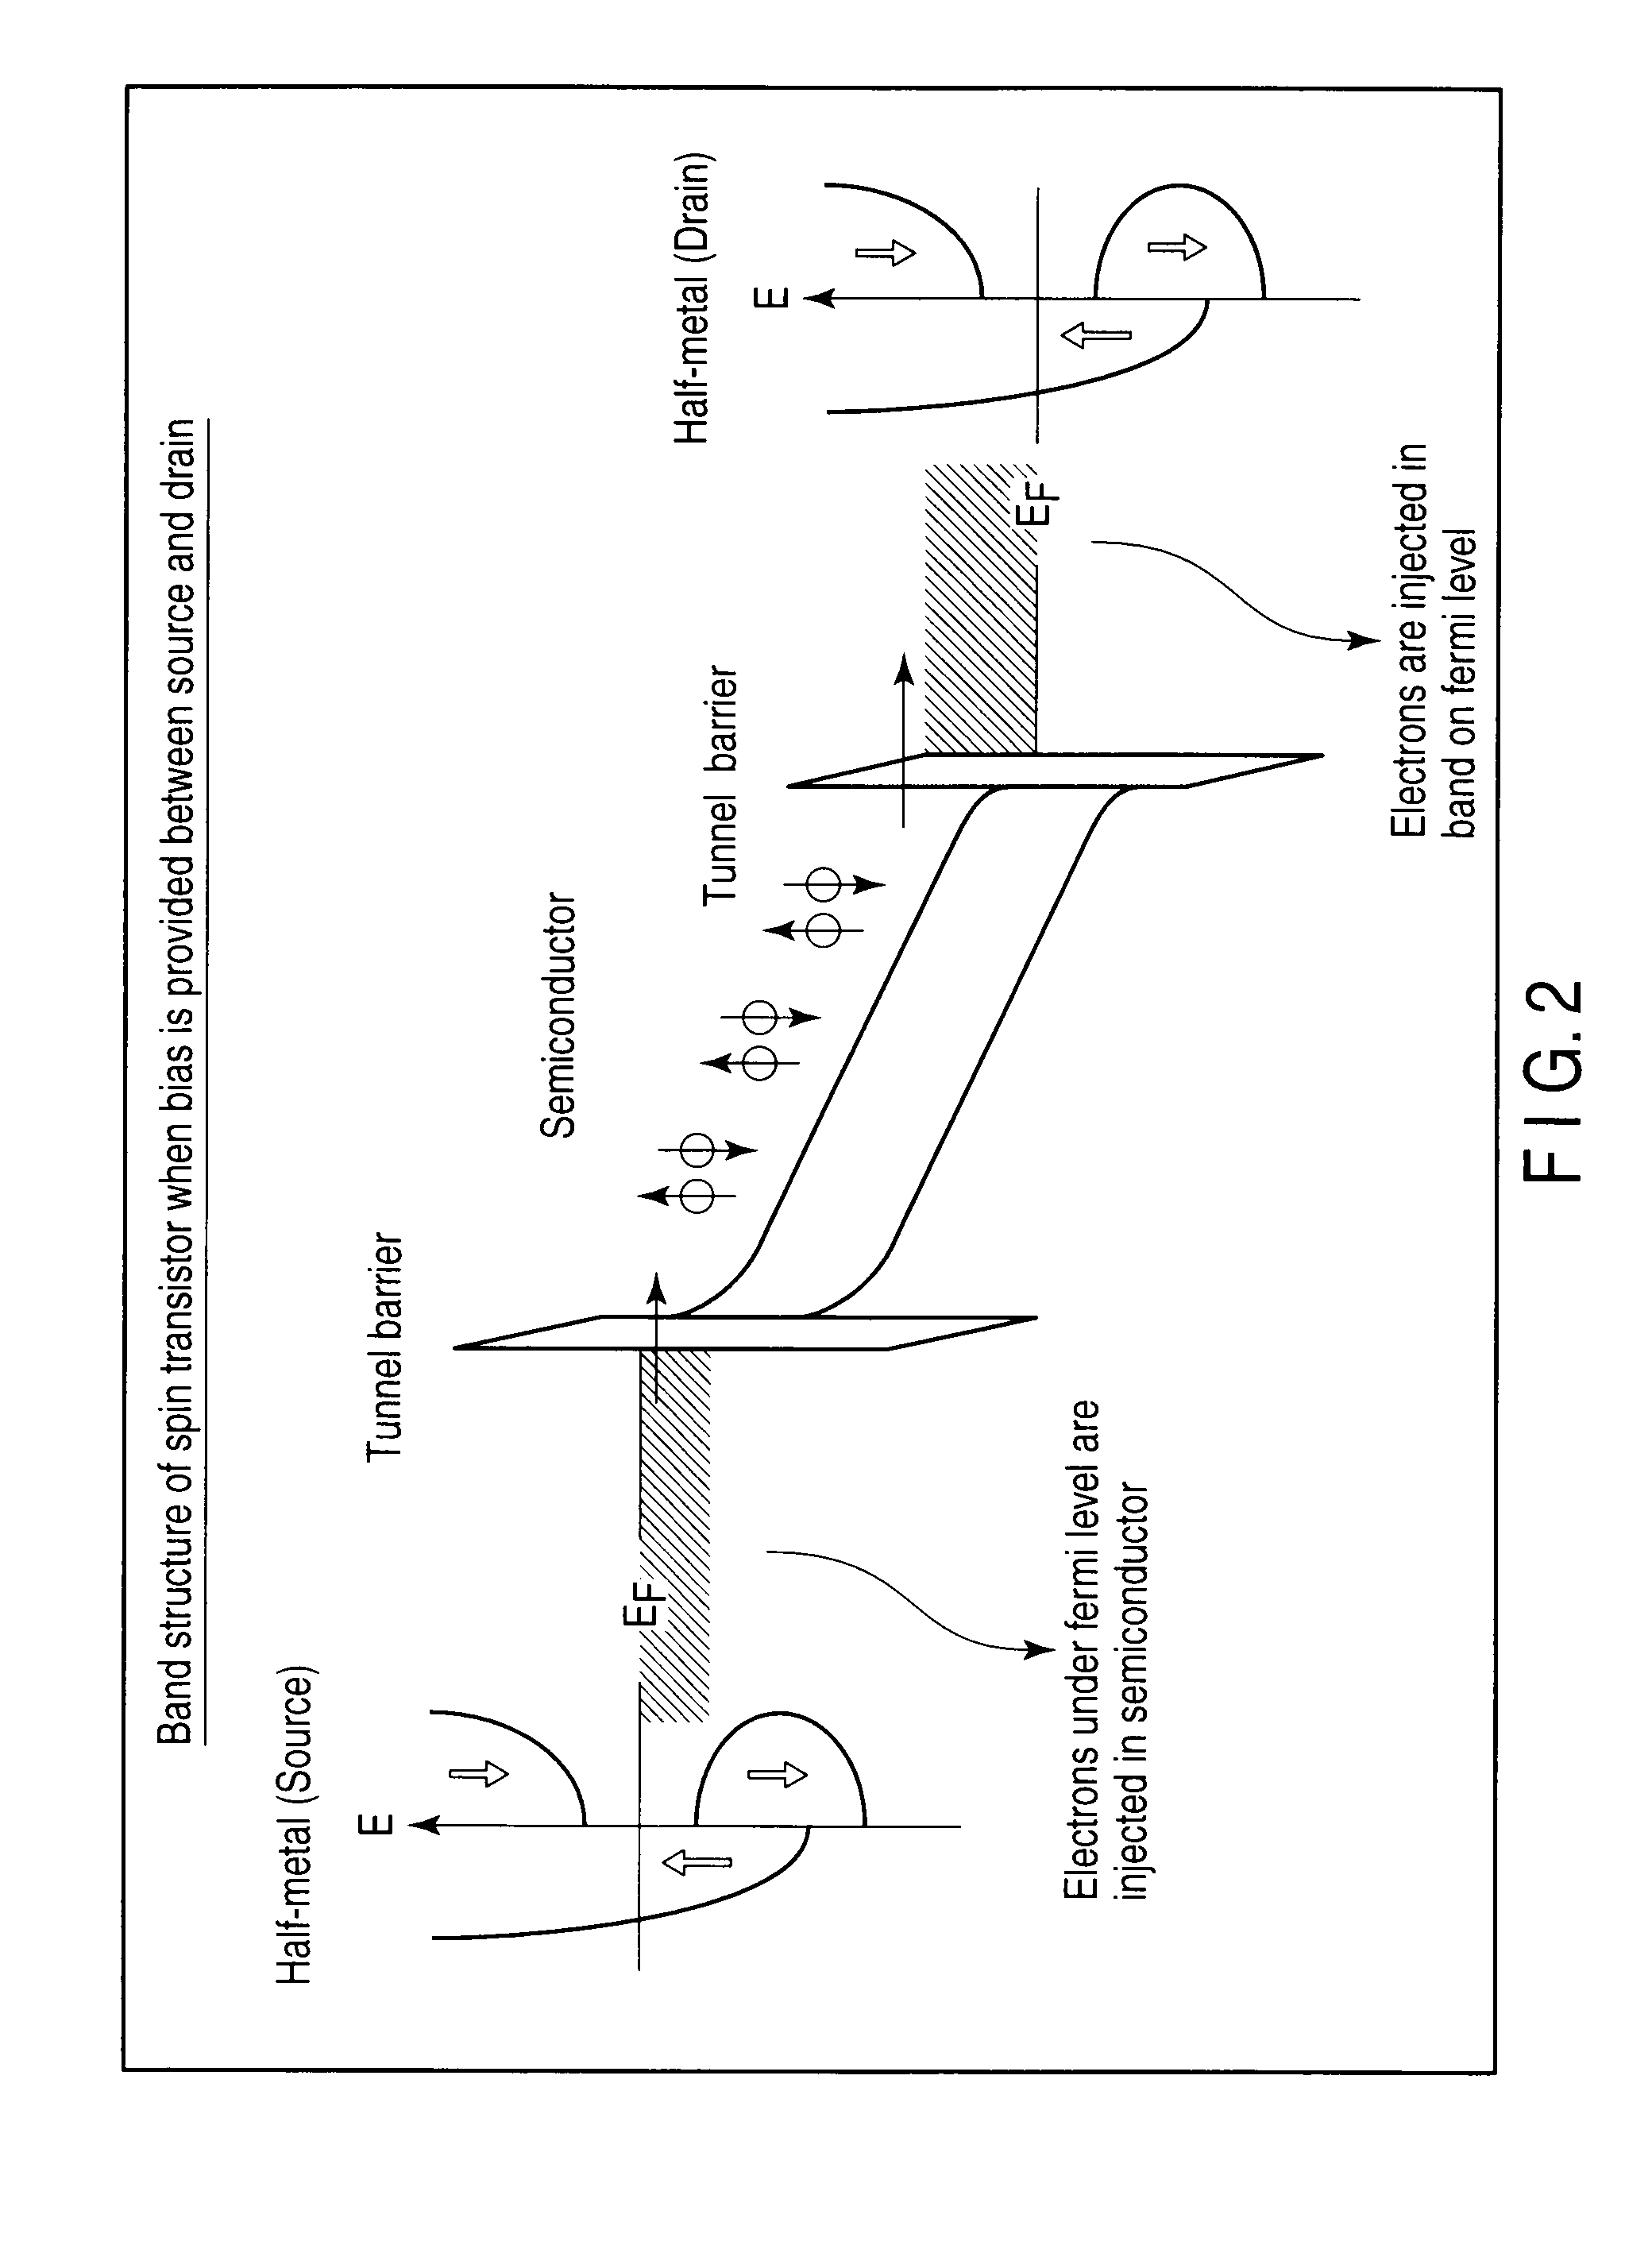 Spin transistor, integrated circuit, and magnetic memory